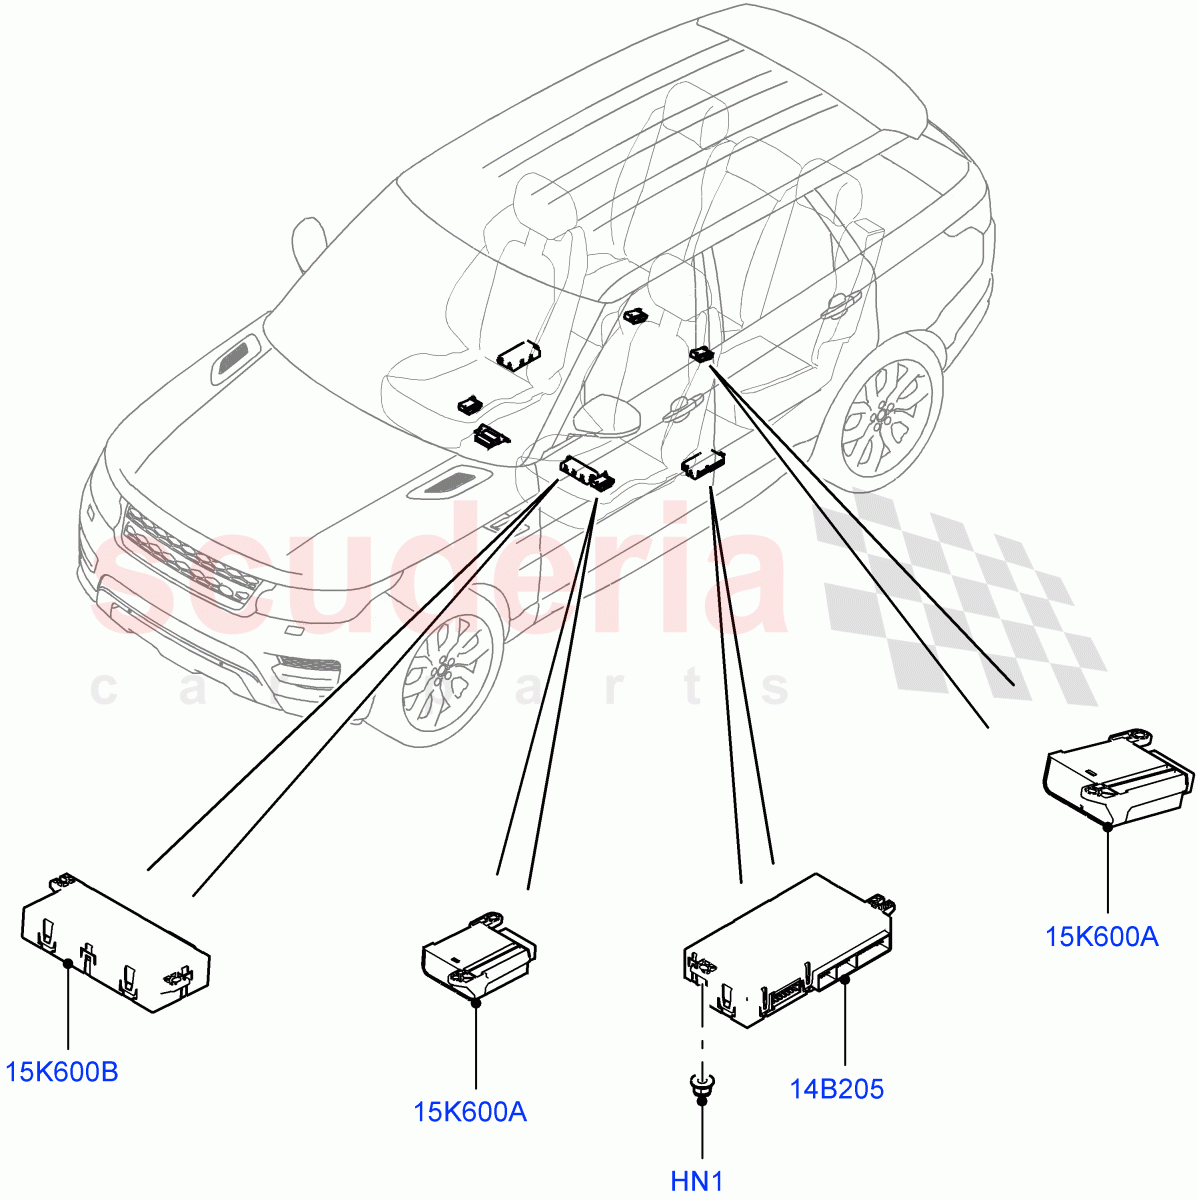 Vehicle Modules And Sensors(Seats) of Land Rover Land Rover Range Rover Sport (2014+) [5.0 OHC SGDI SC V8 Petrol]